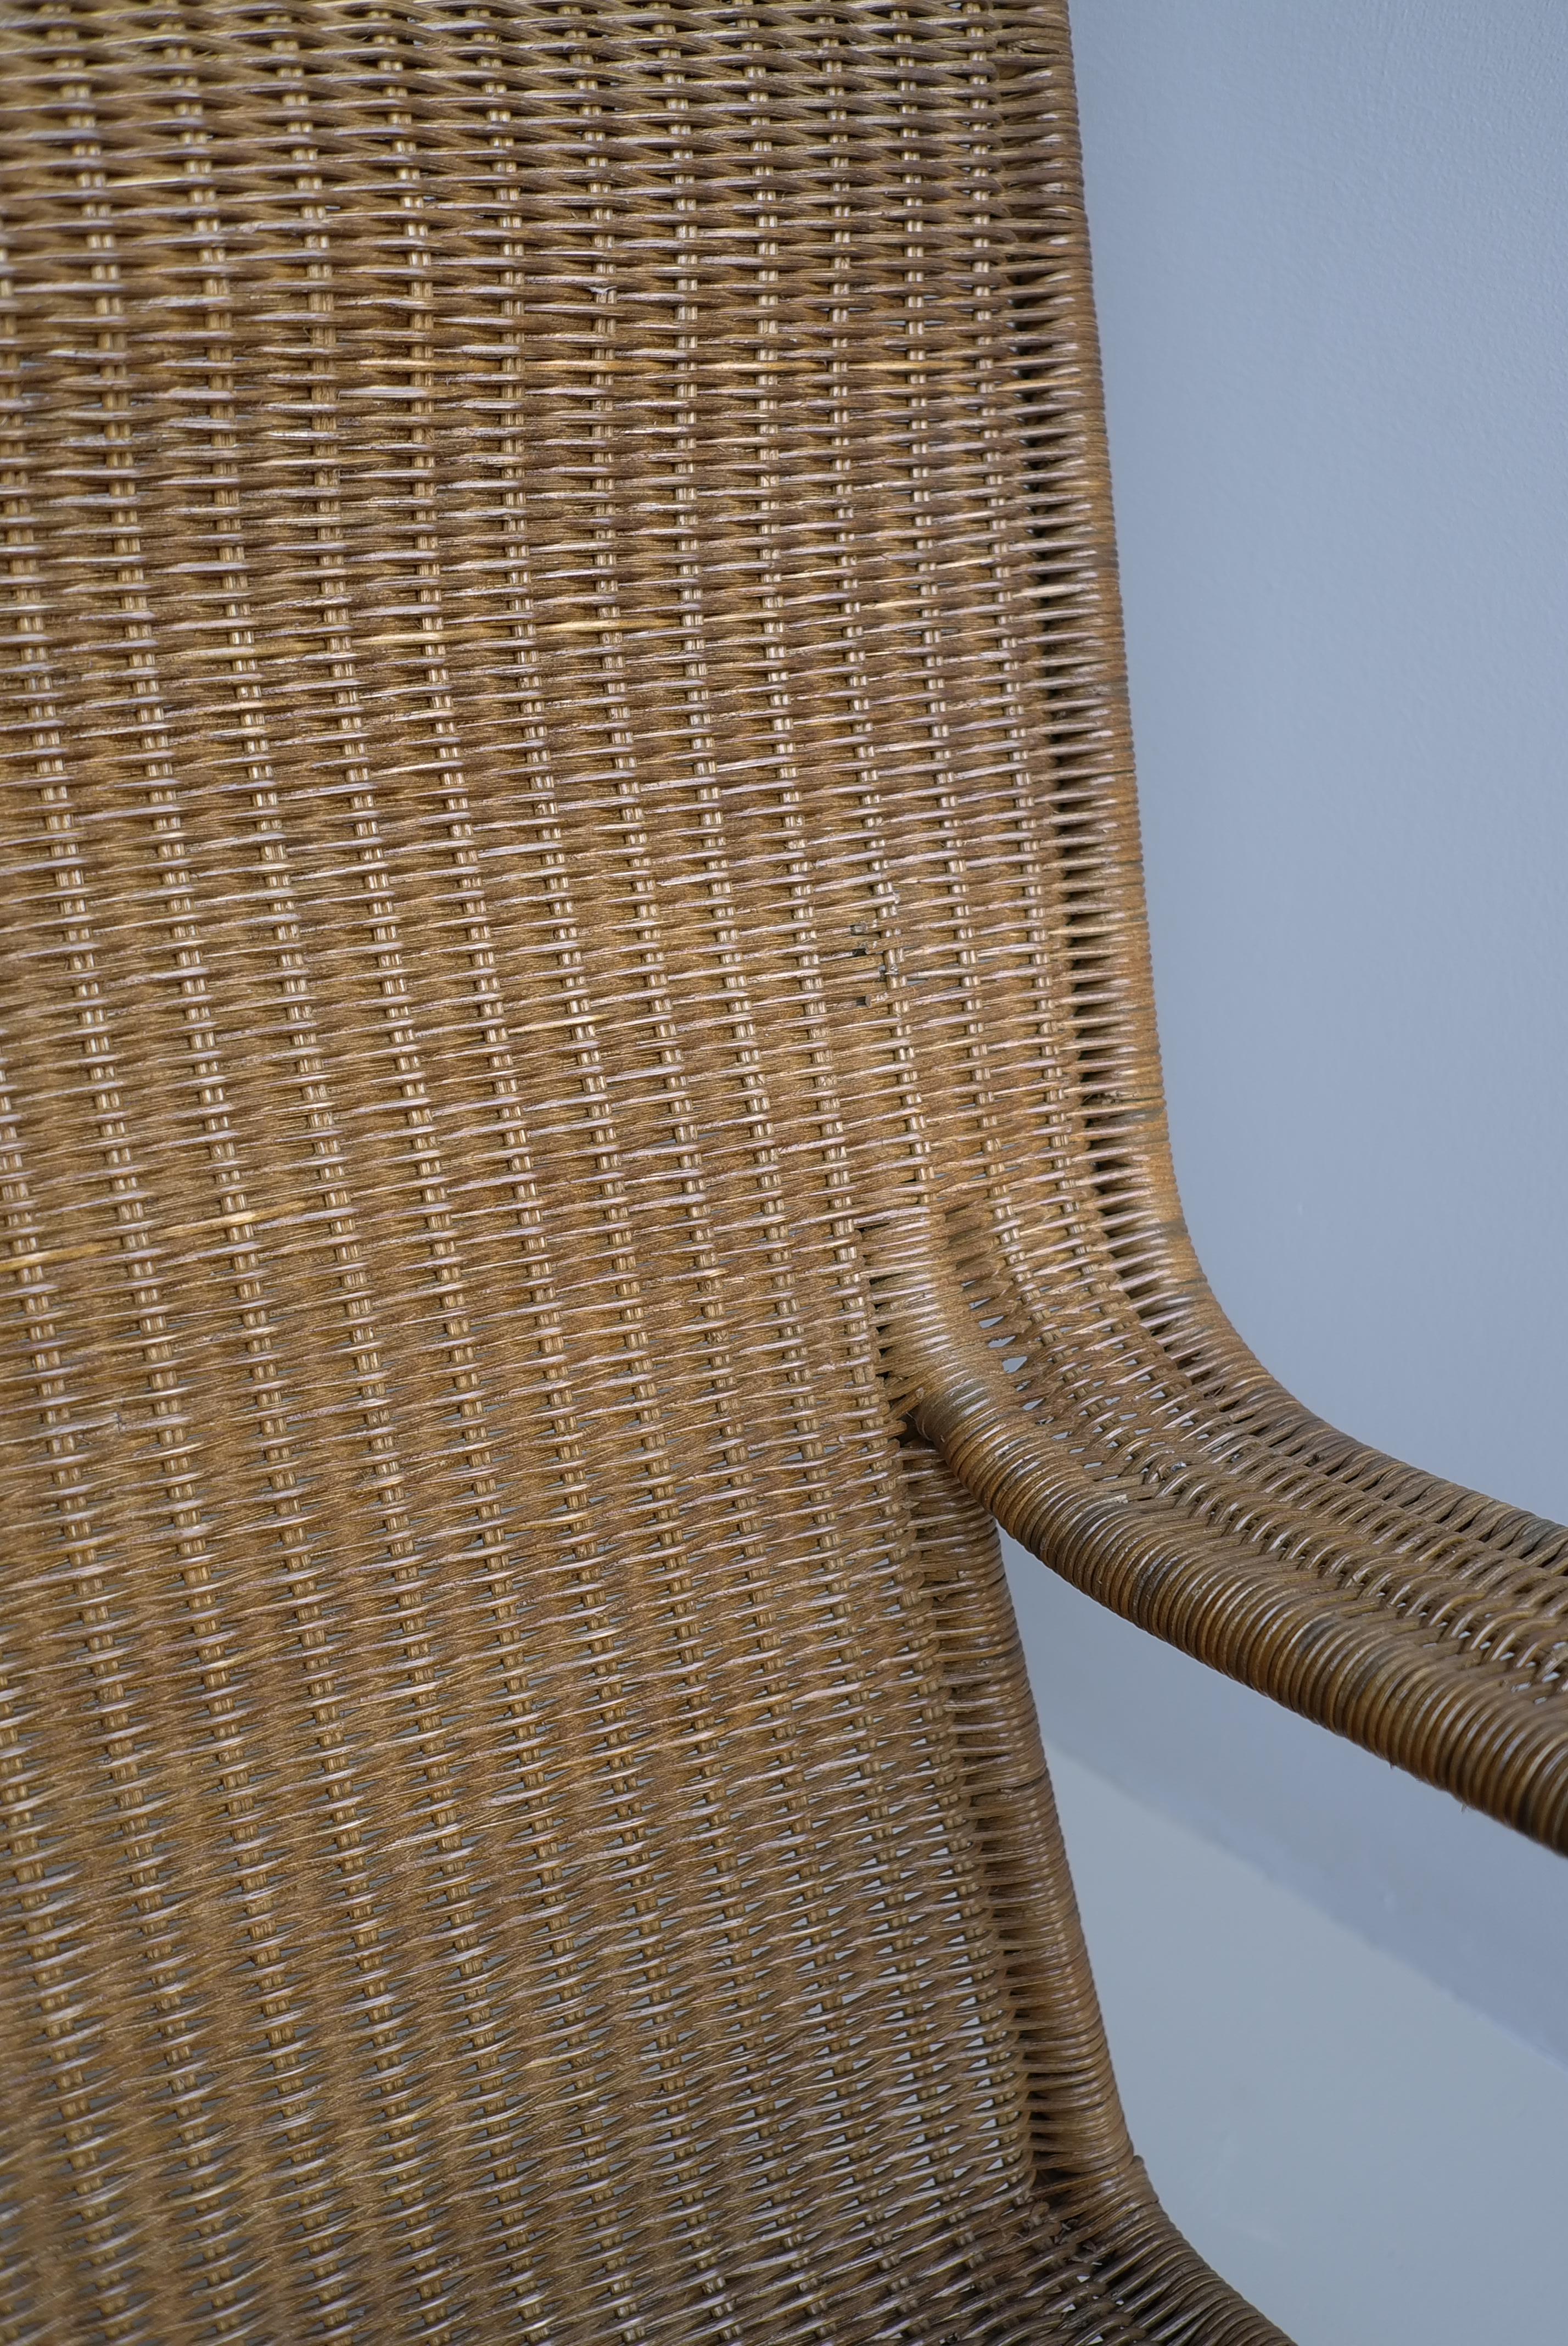 Large Sculptural Wicker Lounge Chair, France circa 1970 For Sale 10